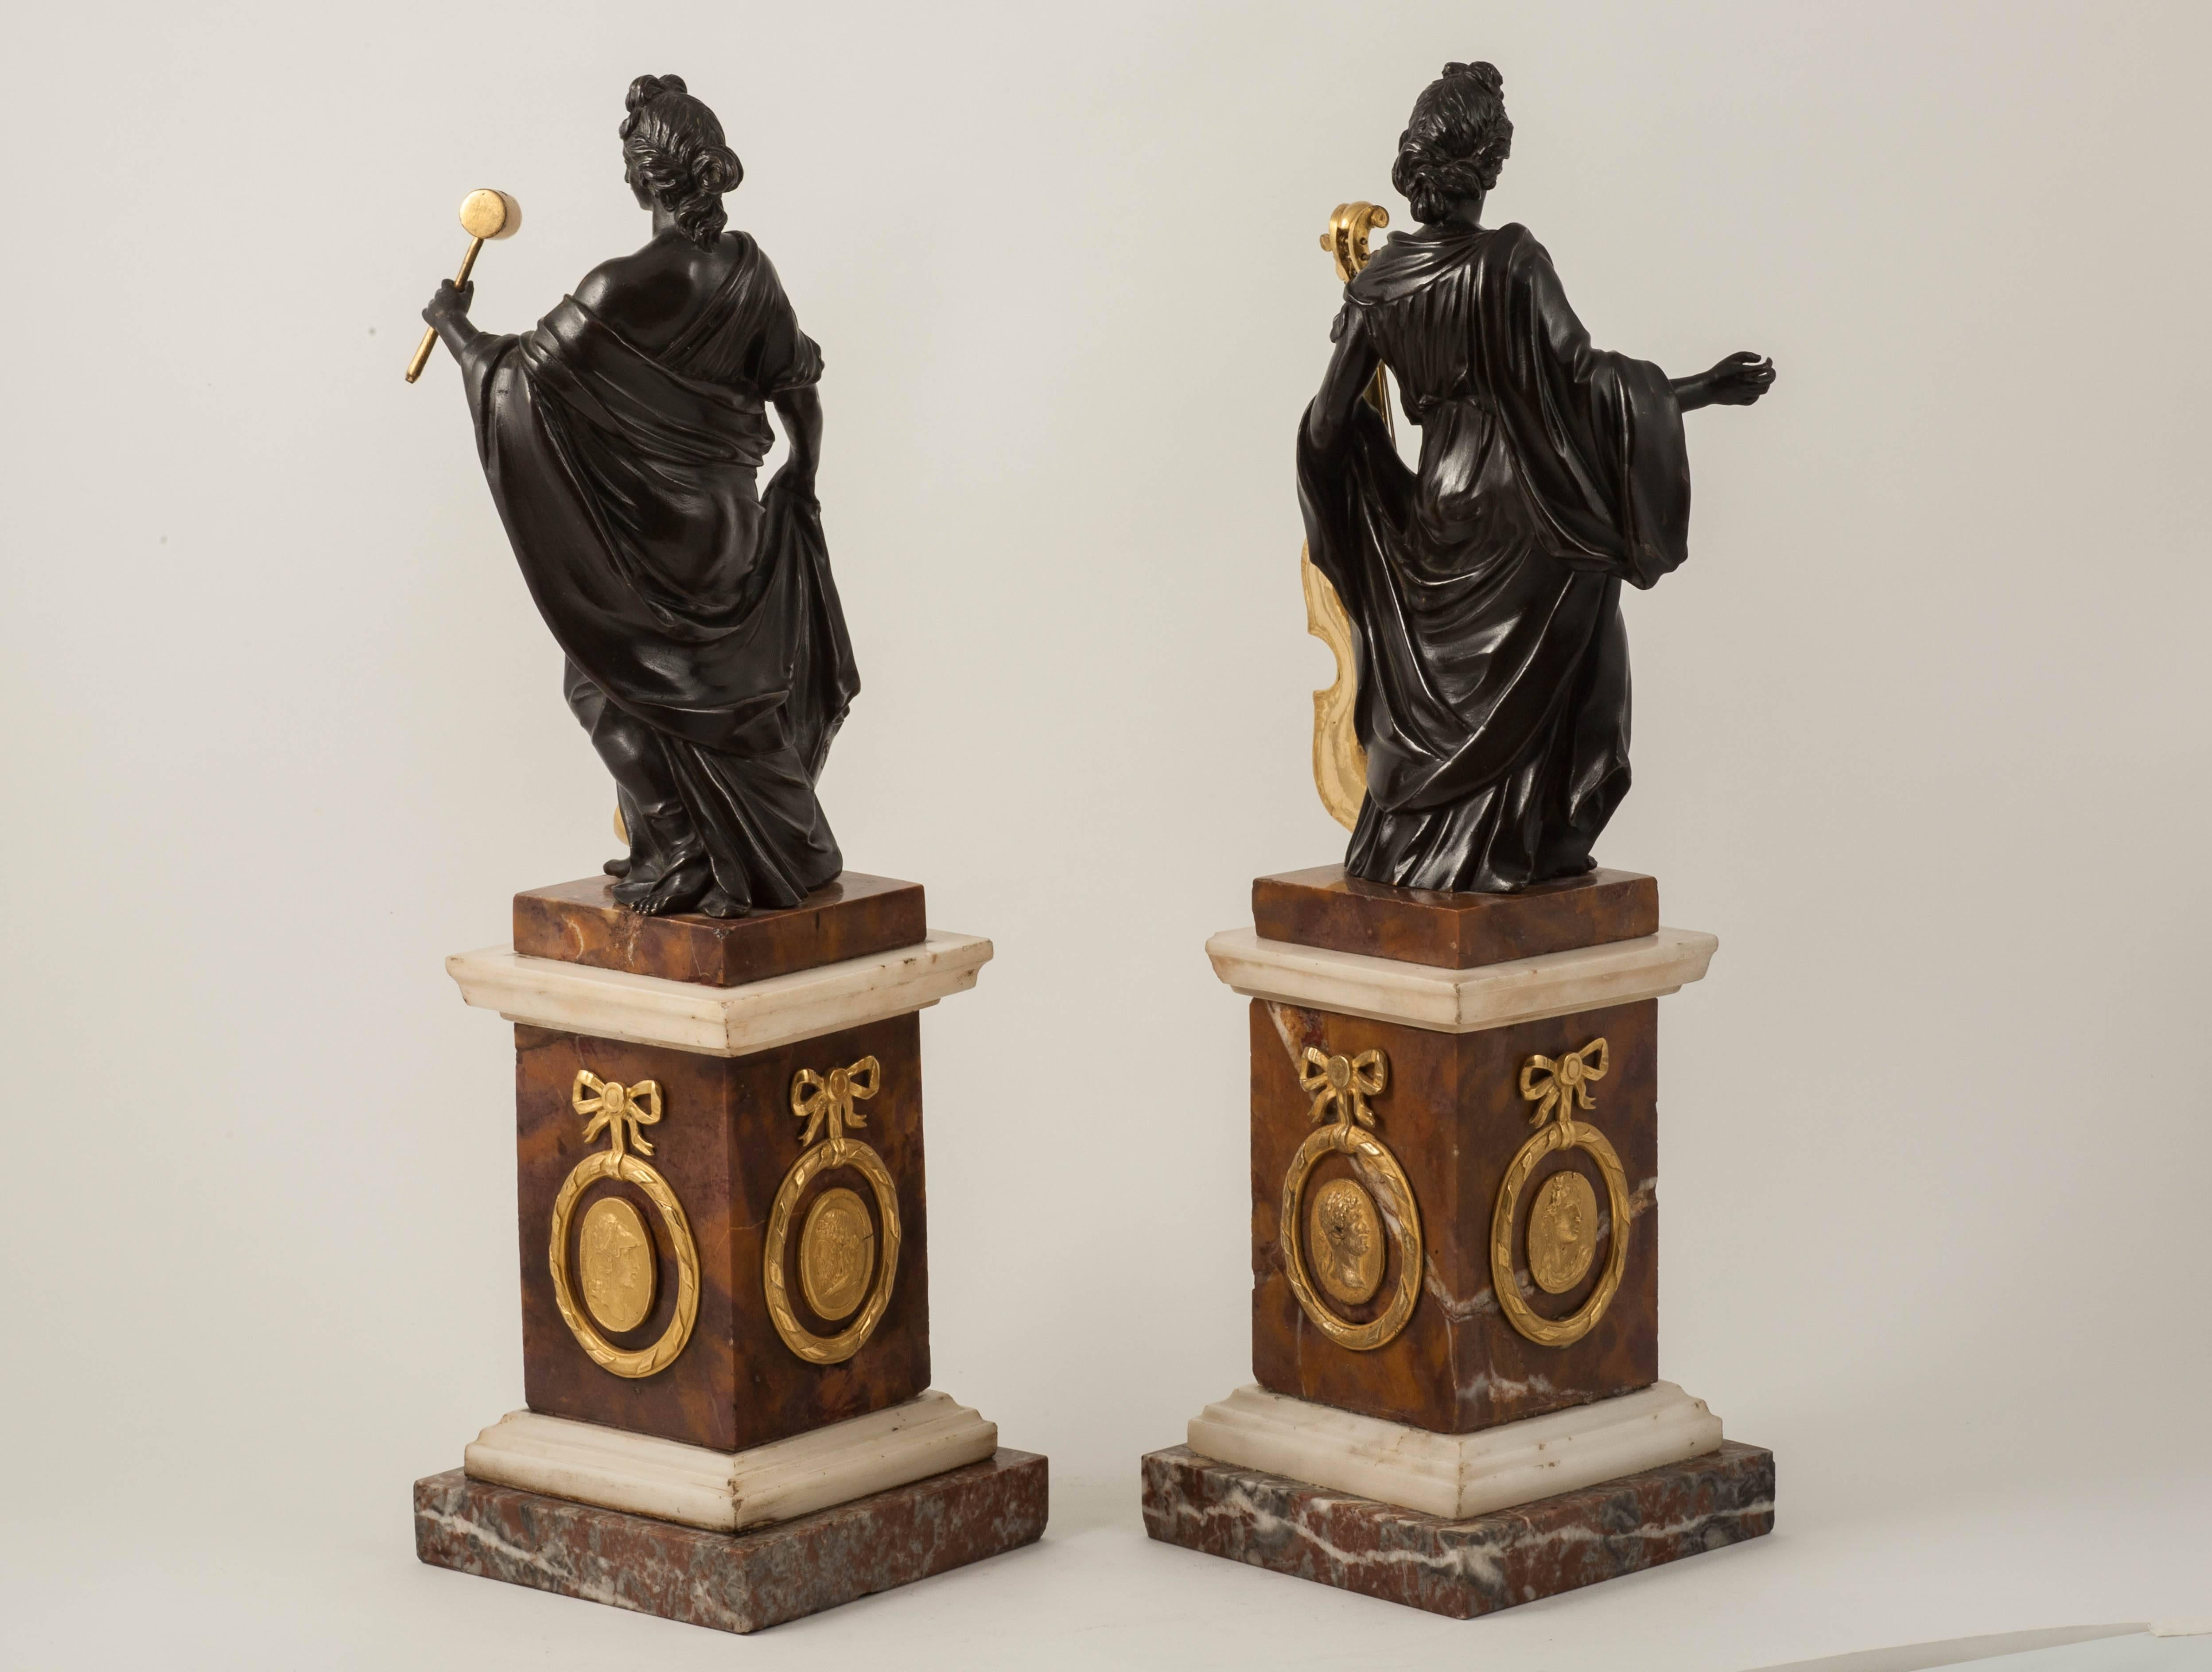 18th Century Rare Pair of Allegorical Bronze Figures Attributed to Valadier, Rome, circa 1780 For Sale